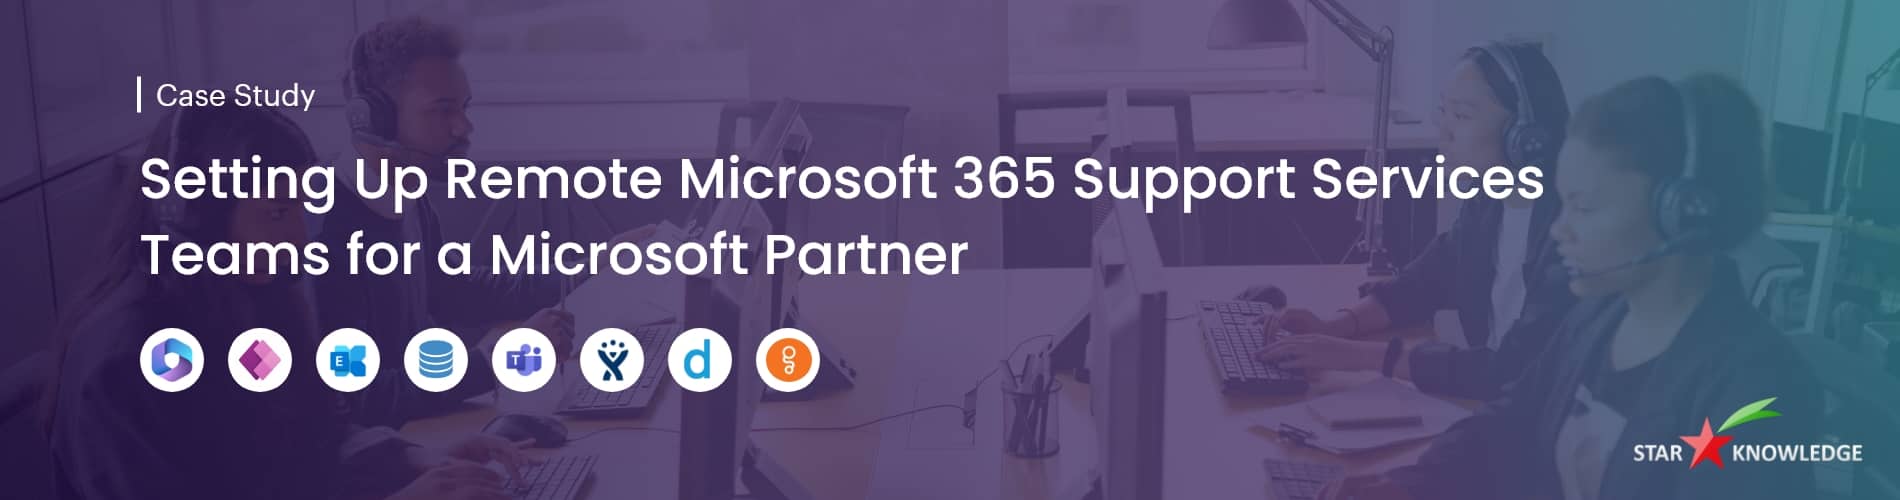 Microsoft 365 consultation for US based Vaccine Manufacturing industry